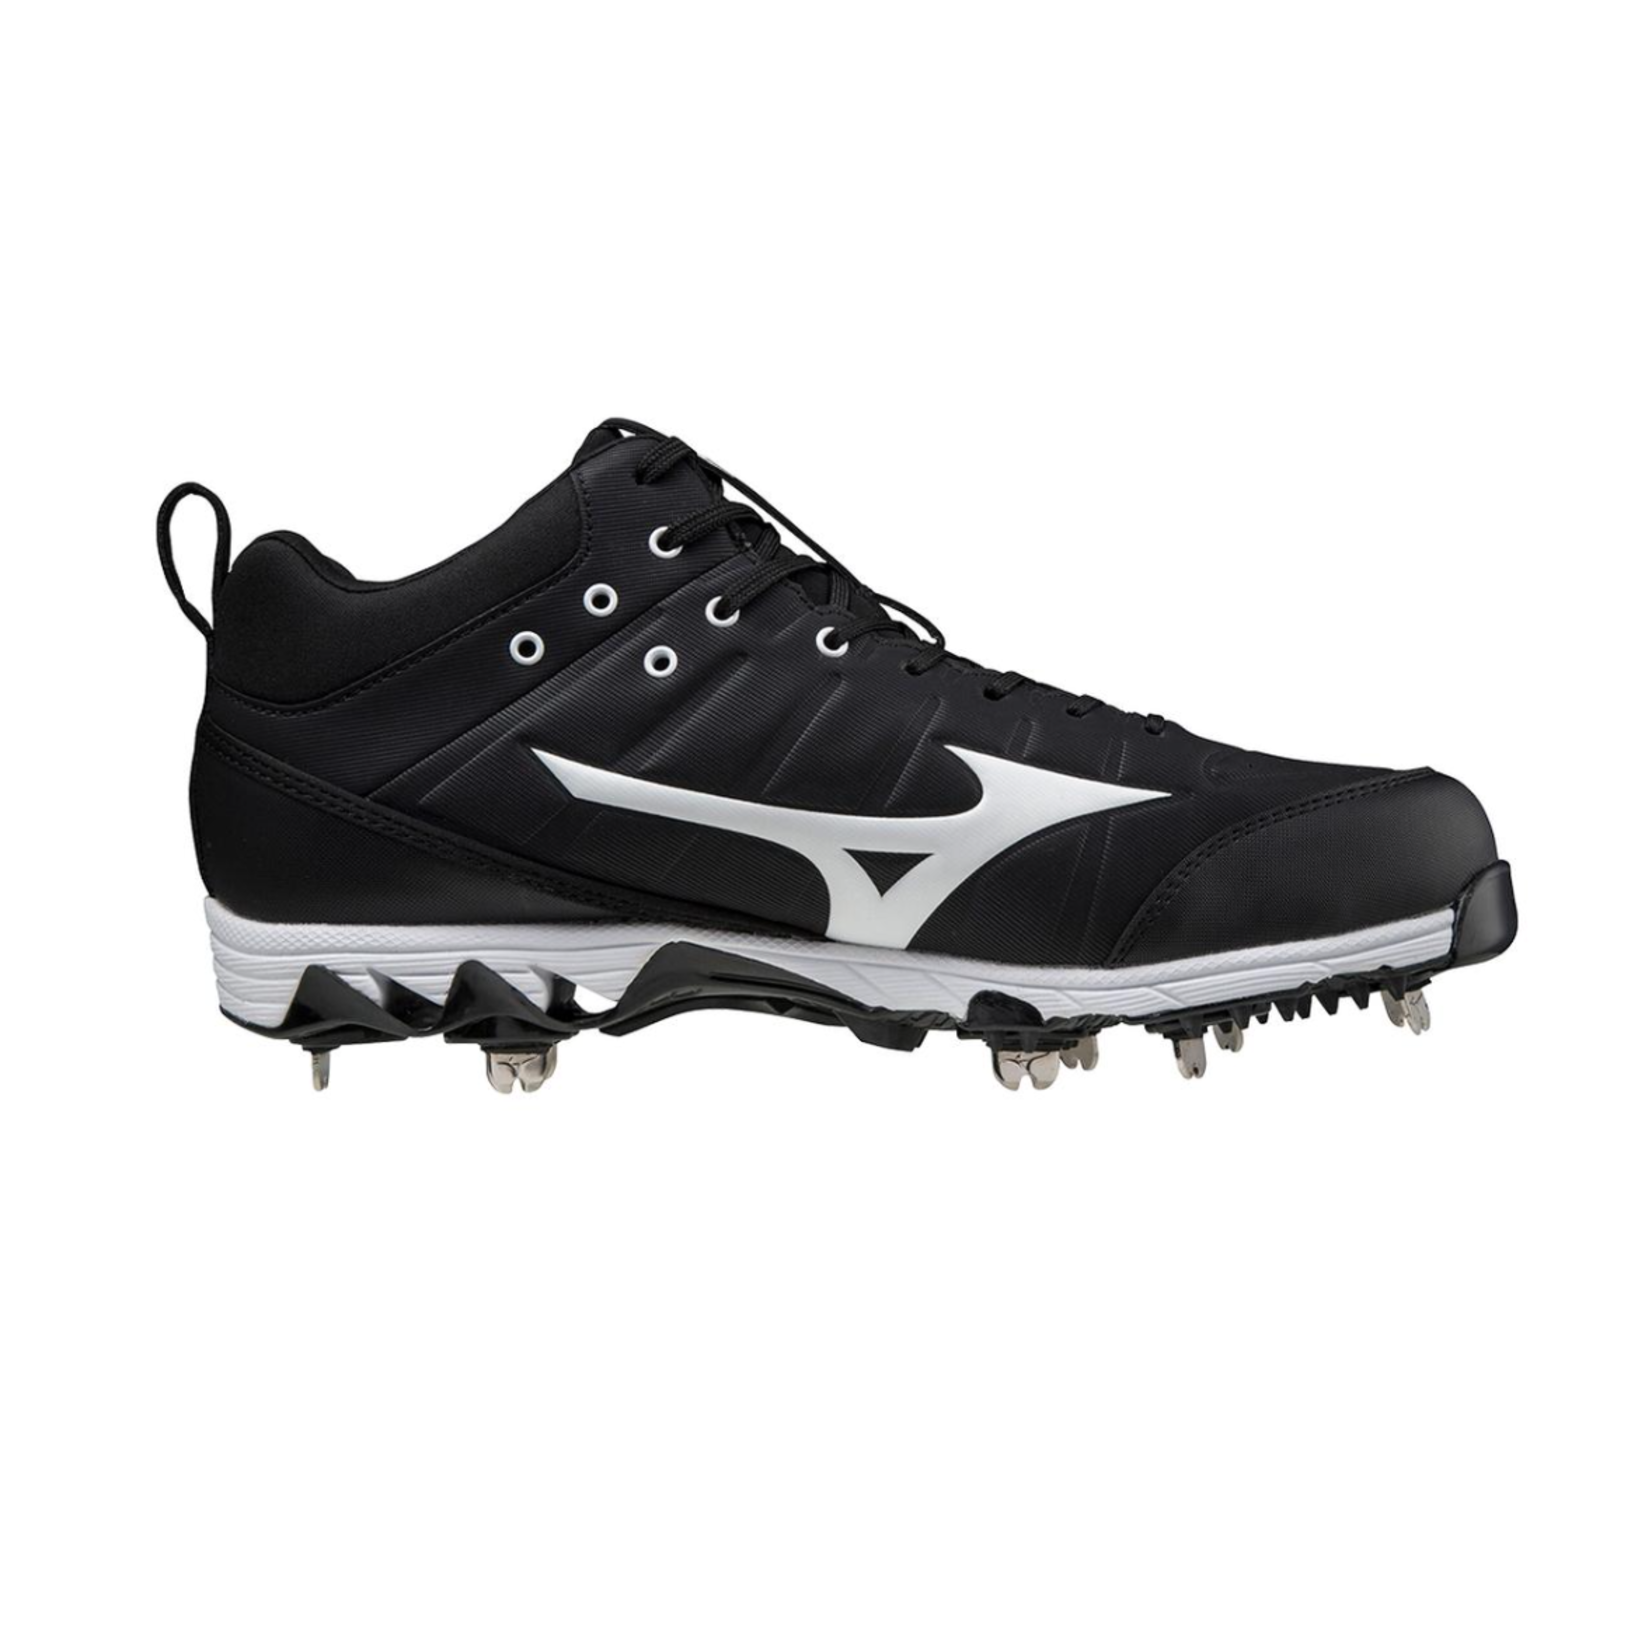 Mizuno S23 9-Spike Ambition 2 Low